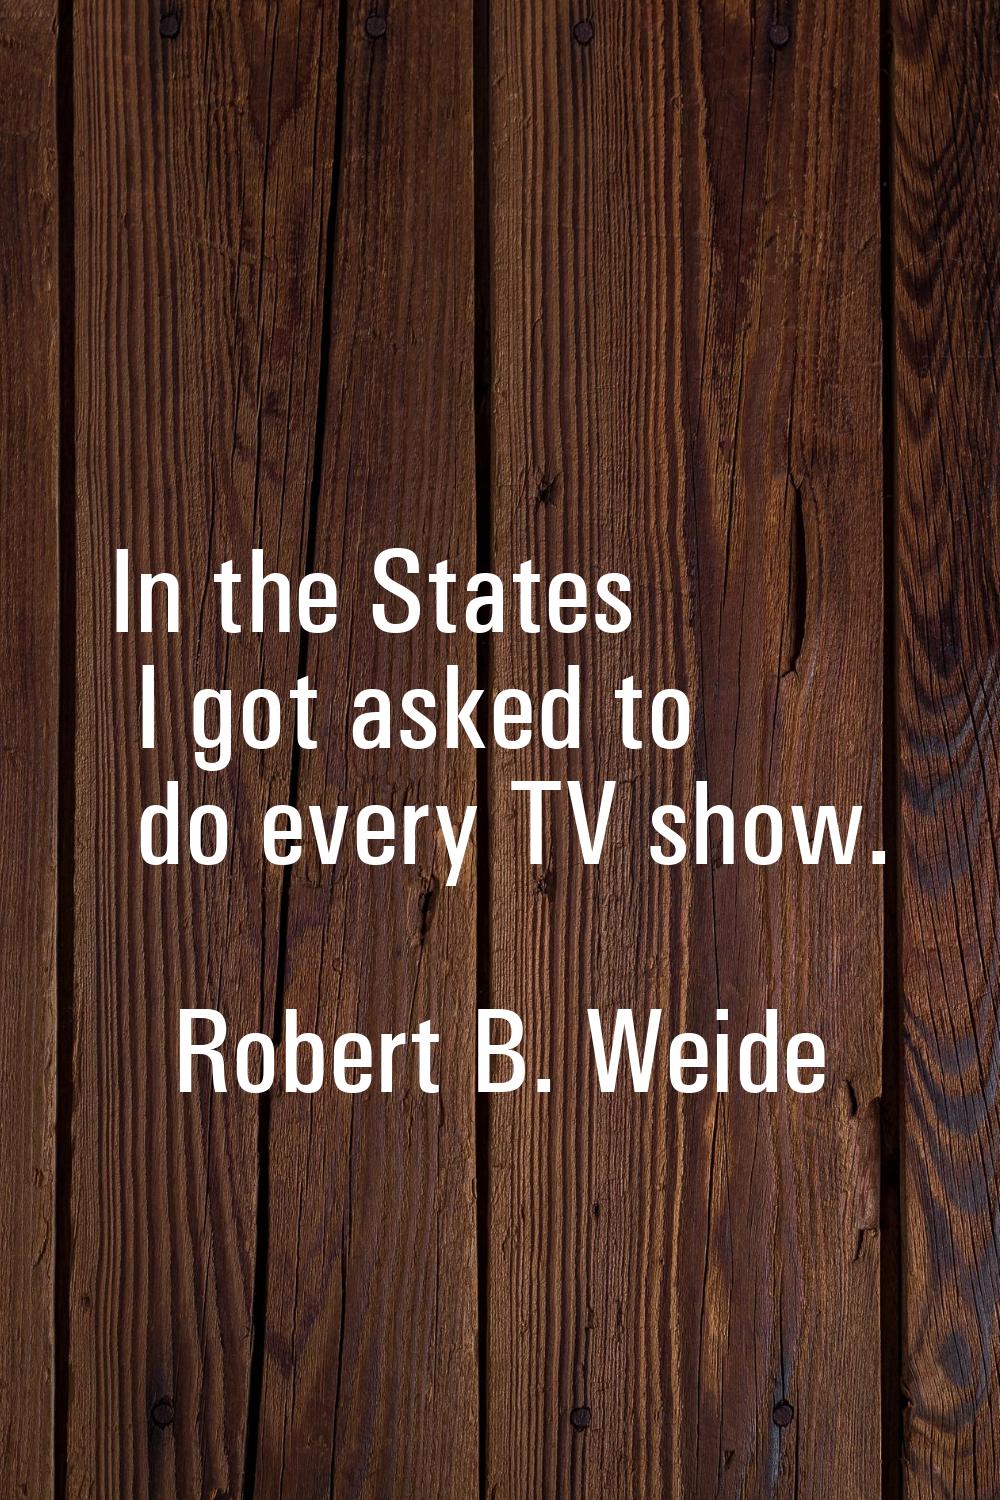 In the States I got asked to do every TV show.